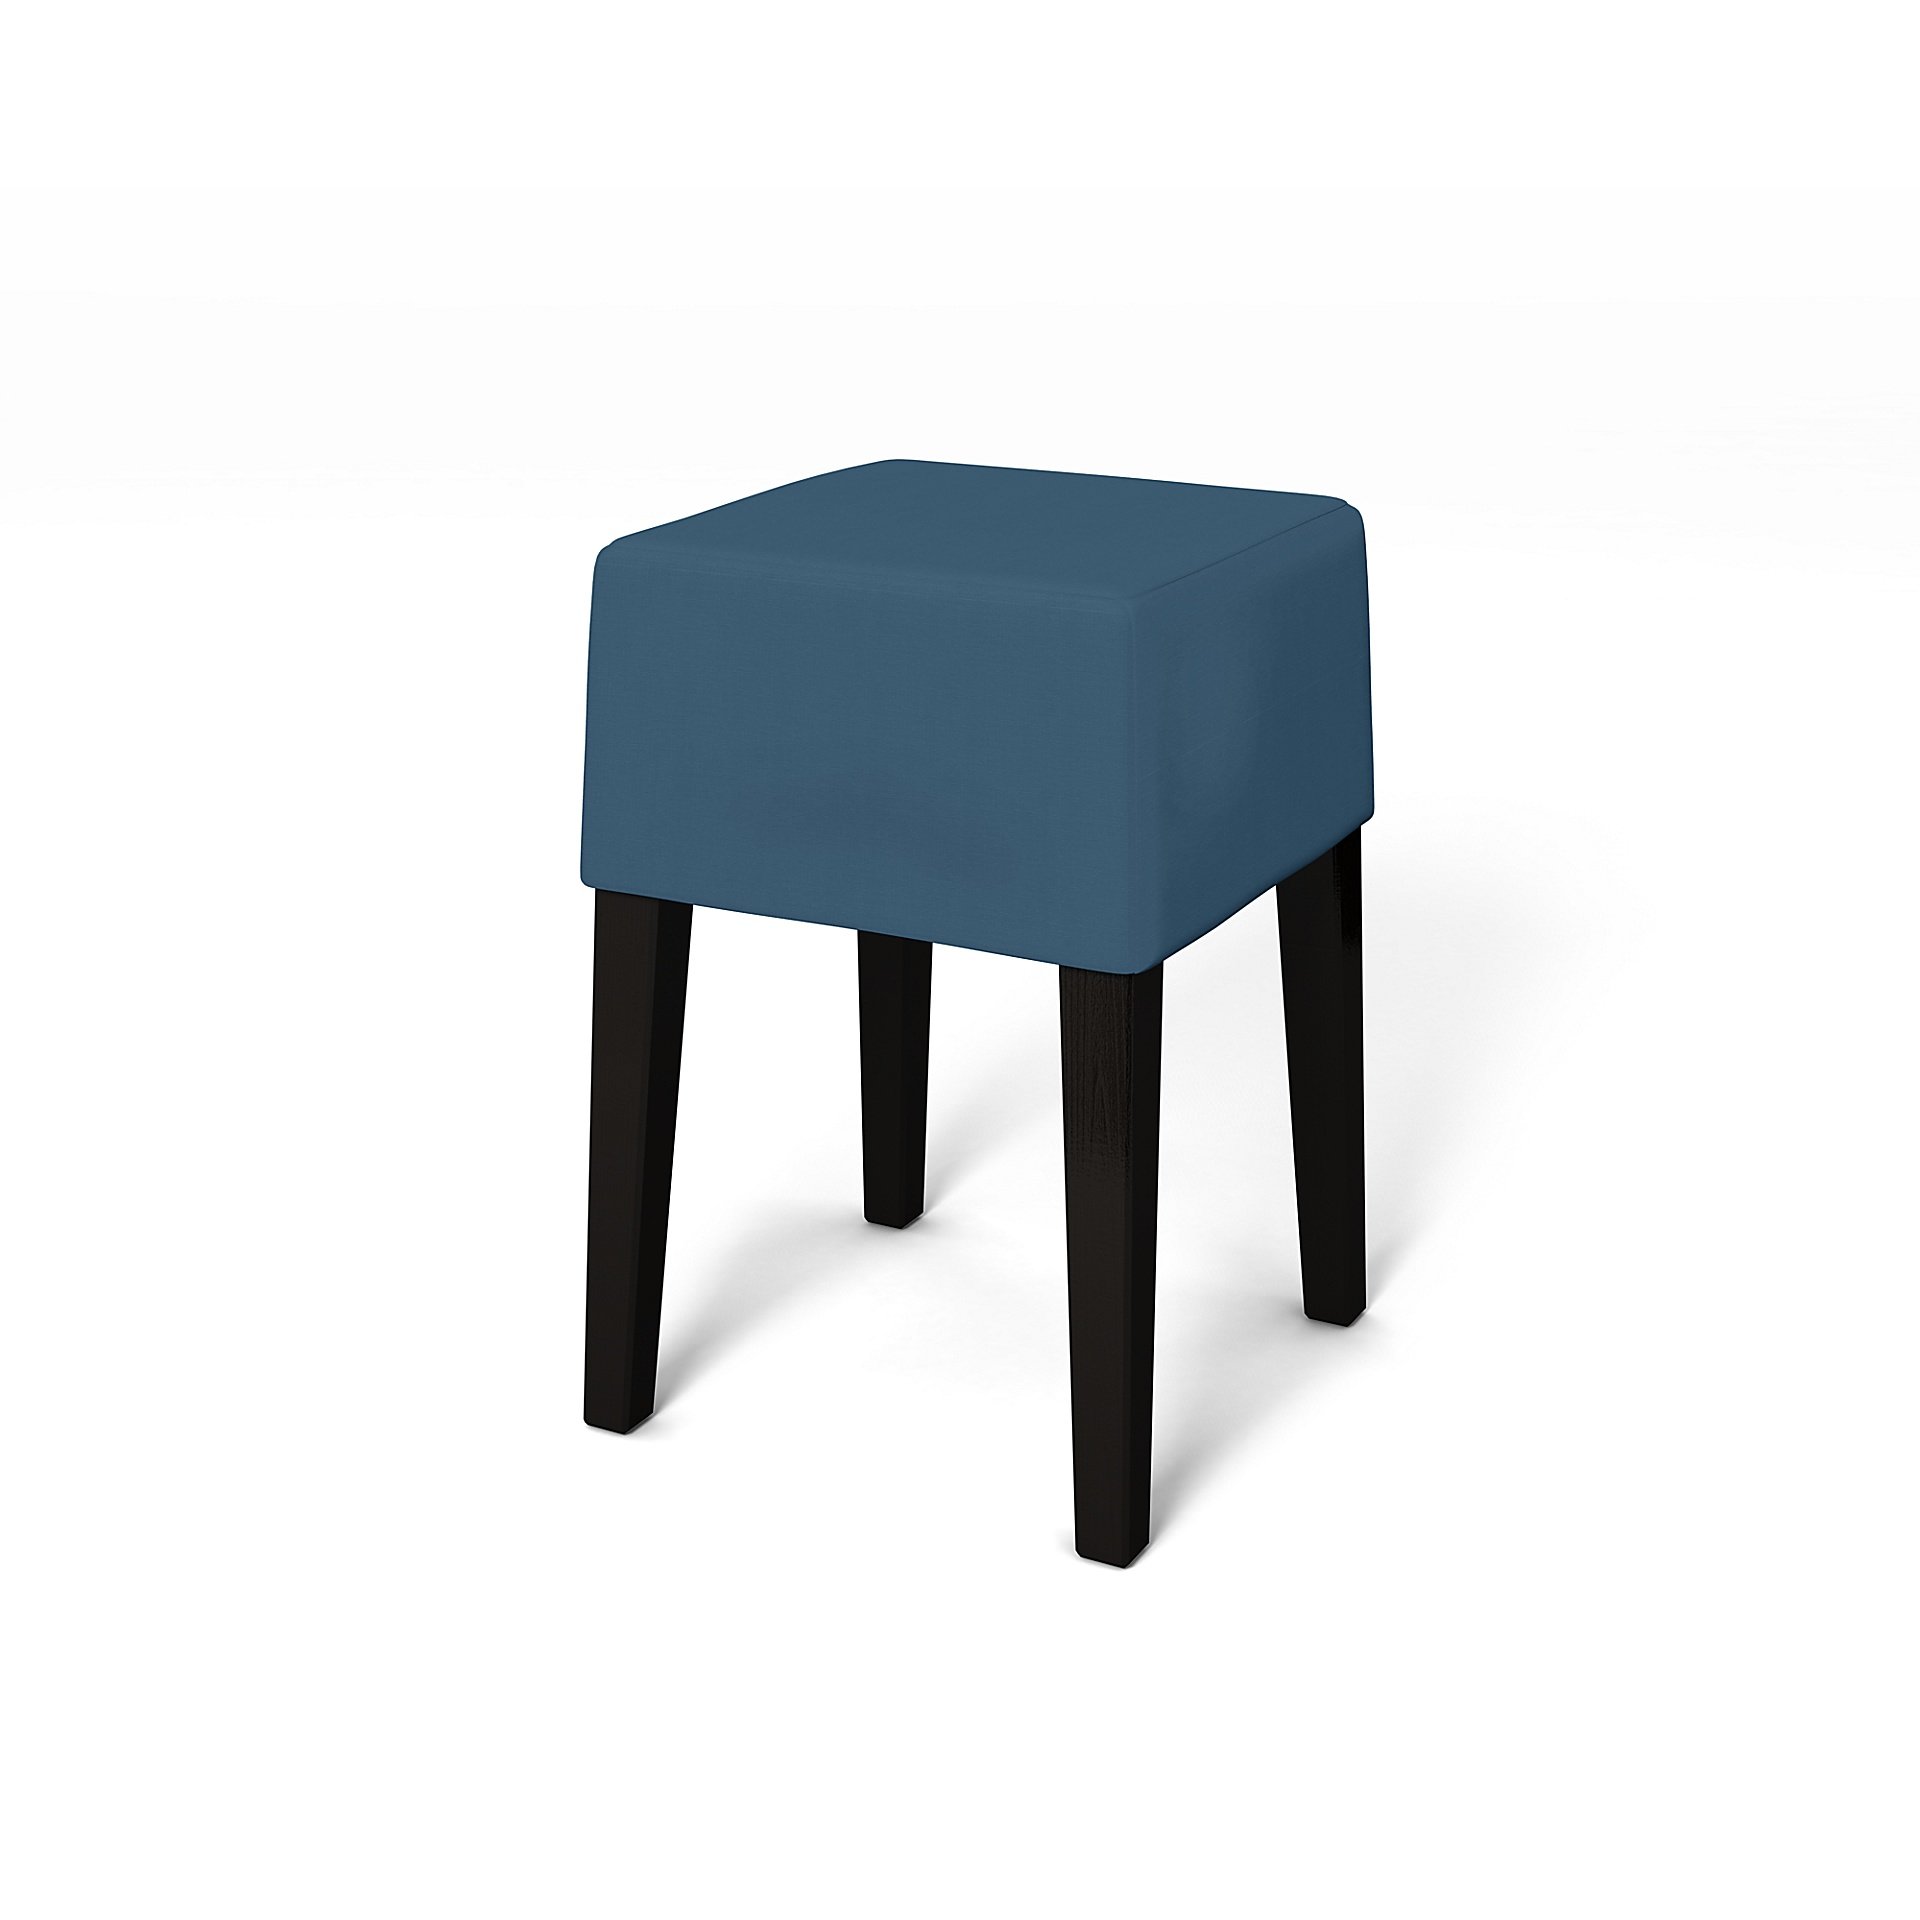 IKEA - Nils Stool Cover, Real Teal, Cotton - Bemz